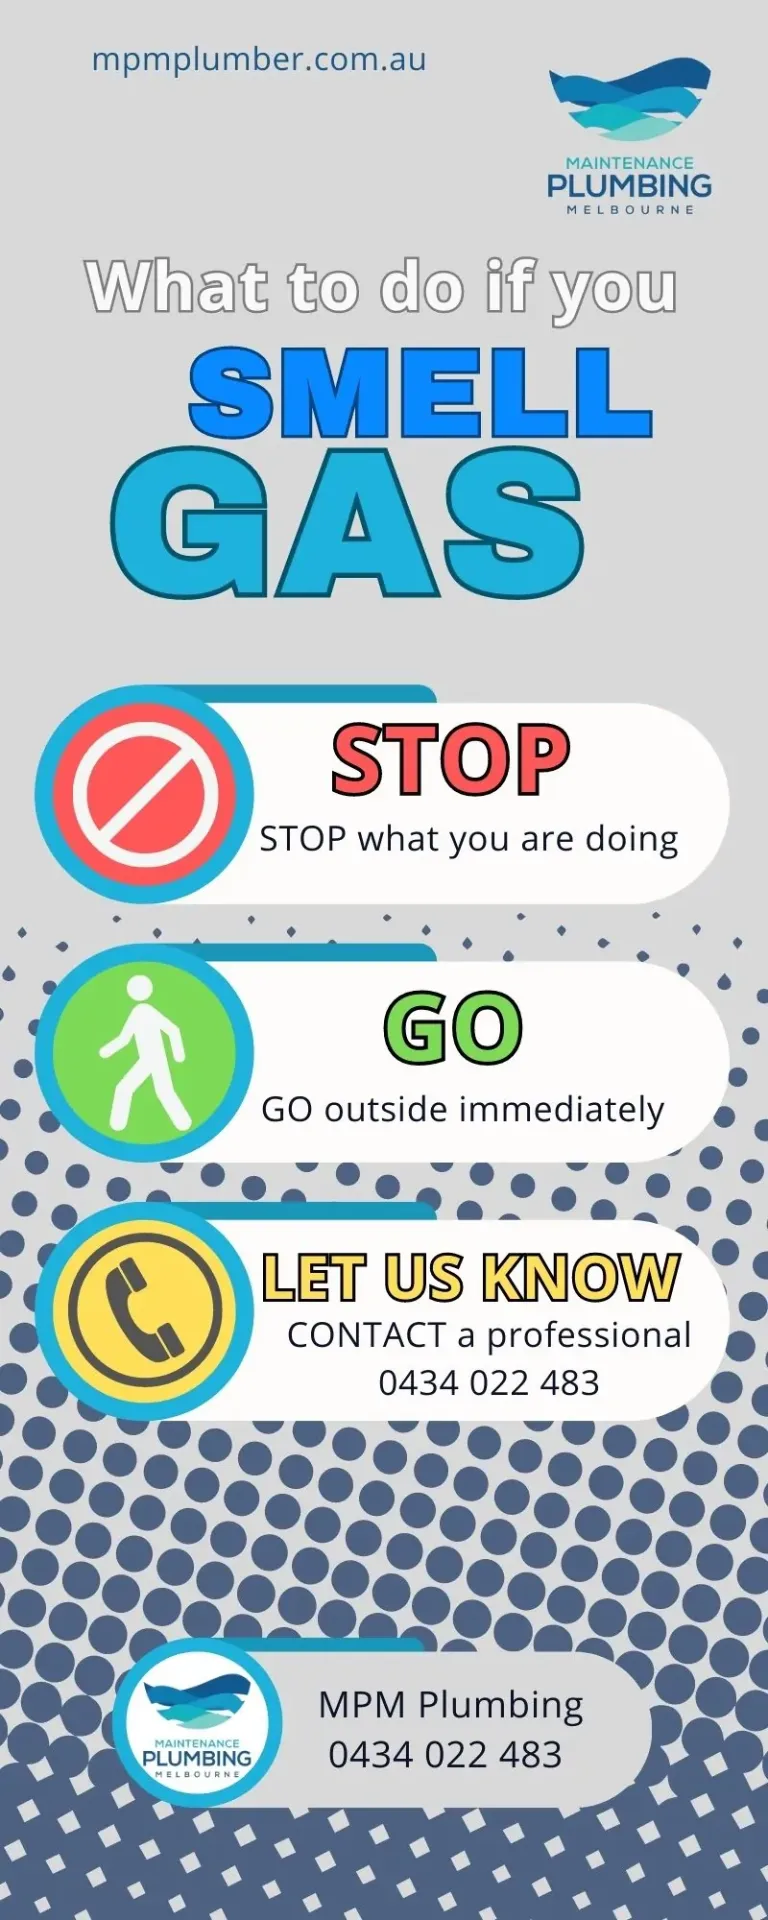 What to do if you smell gas: Stop, Go, Let us Know!